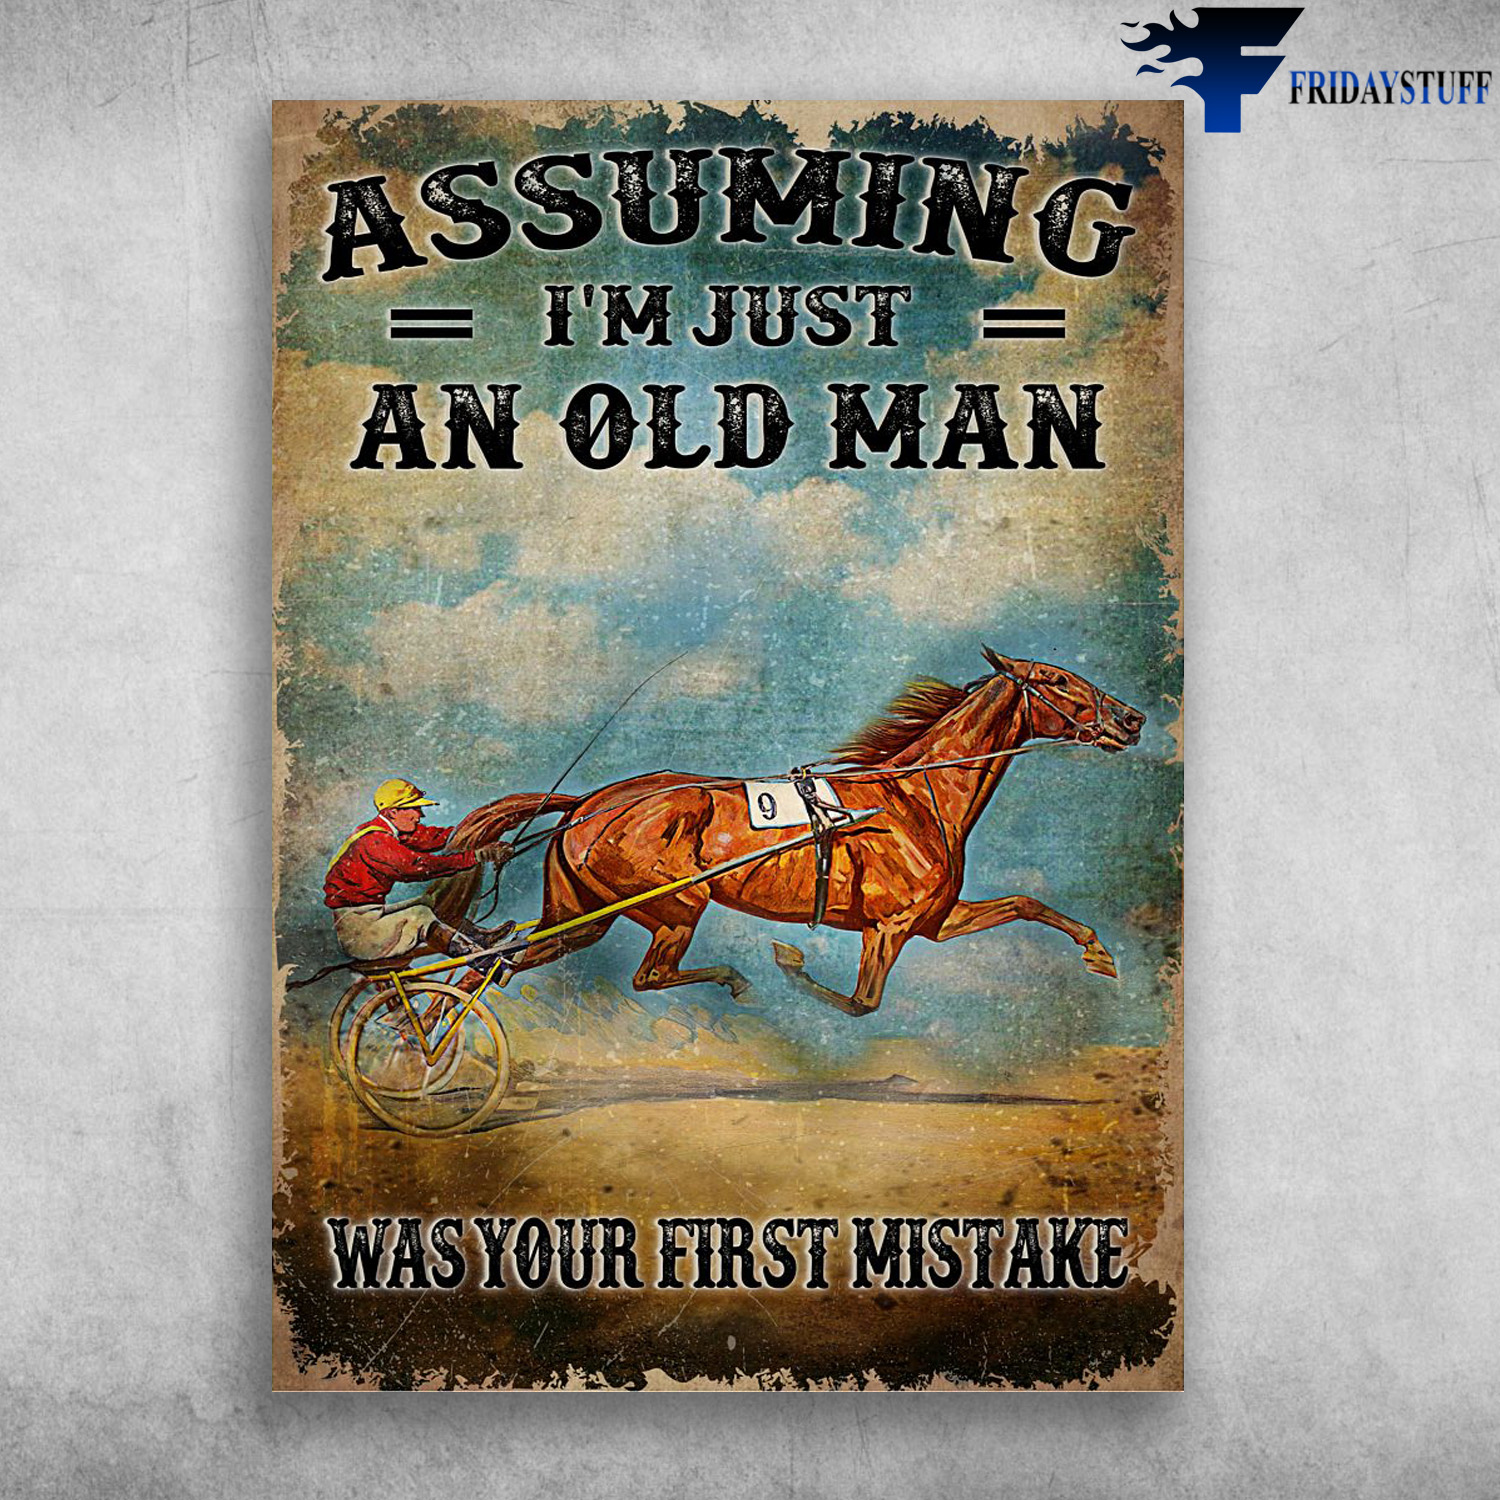 Harness Racing - Assuming I'm Just An Old Man, Was Your First Mistake